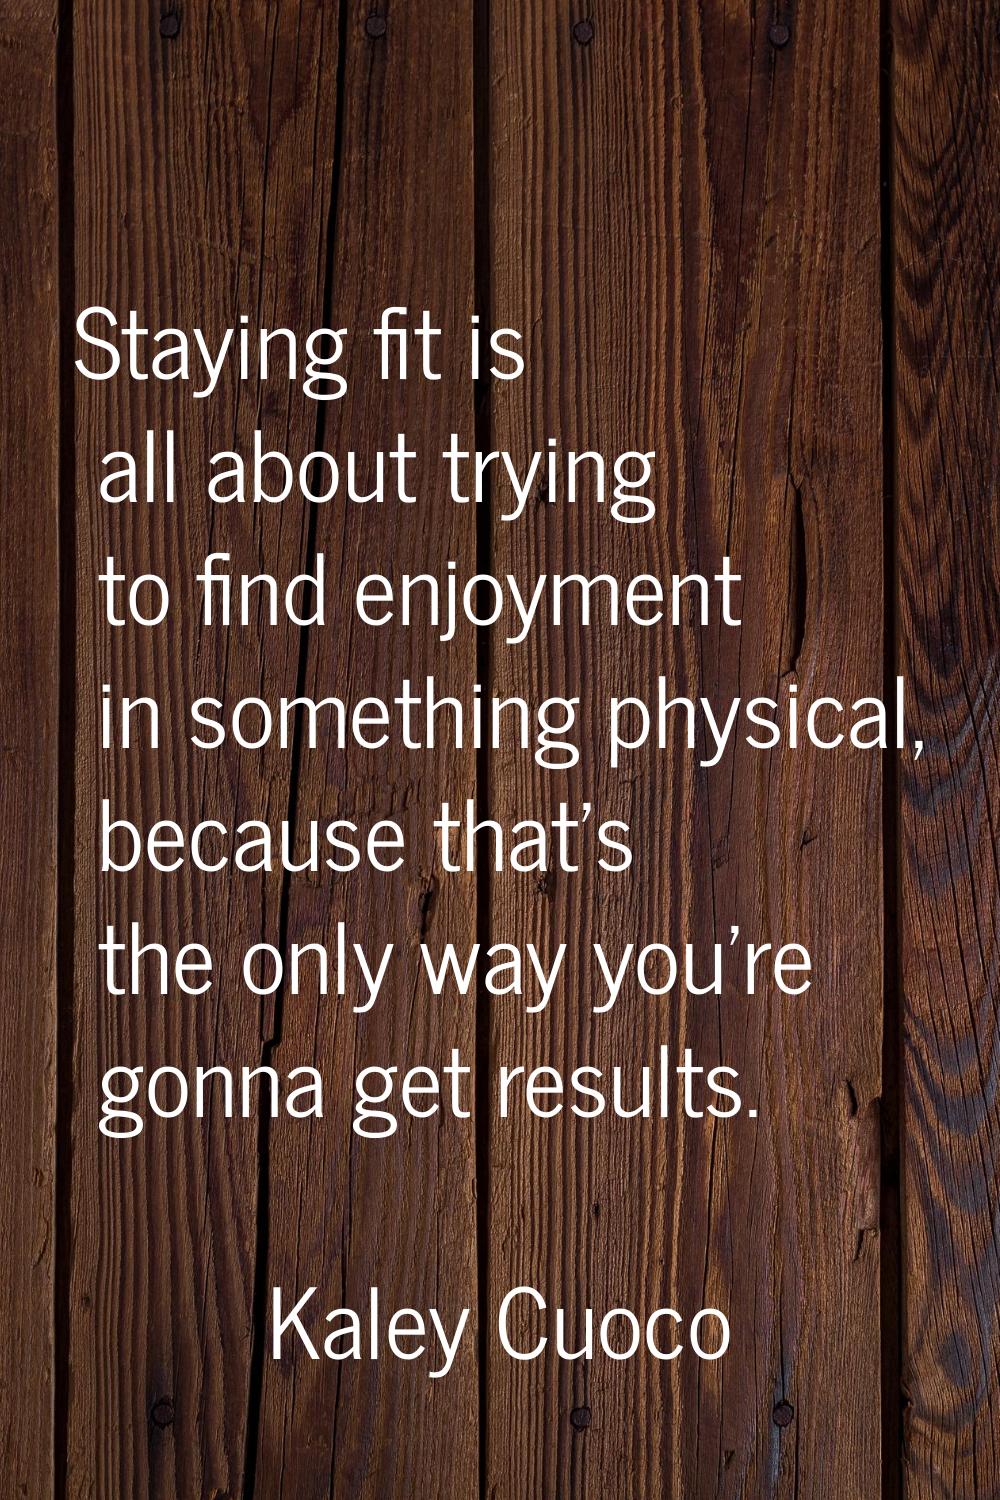 Staying fit is all about trying to find enjoyment in something physical, because that's the only wa